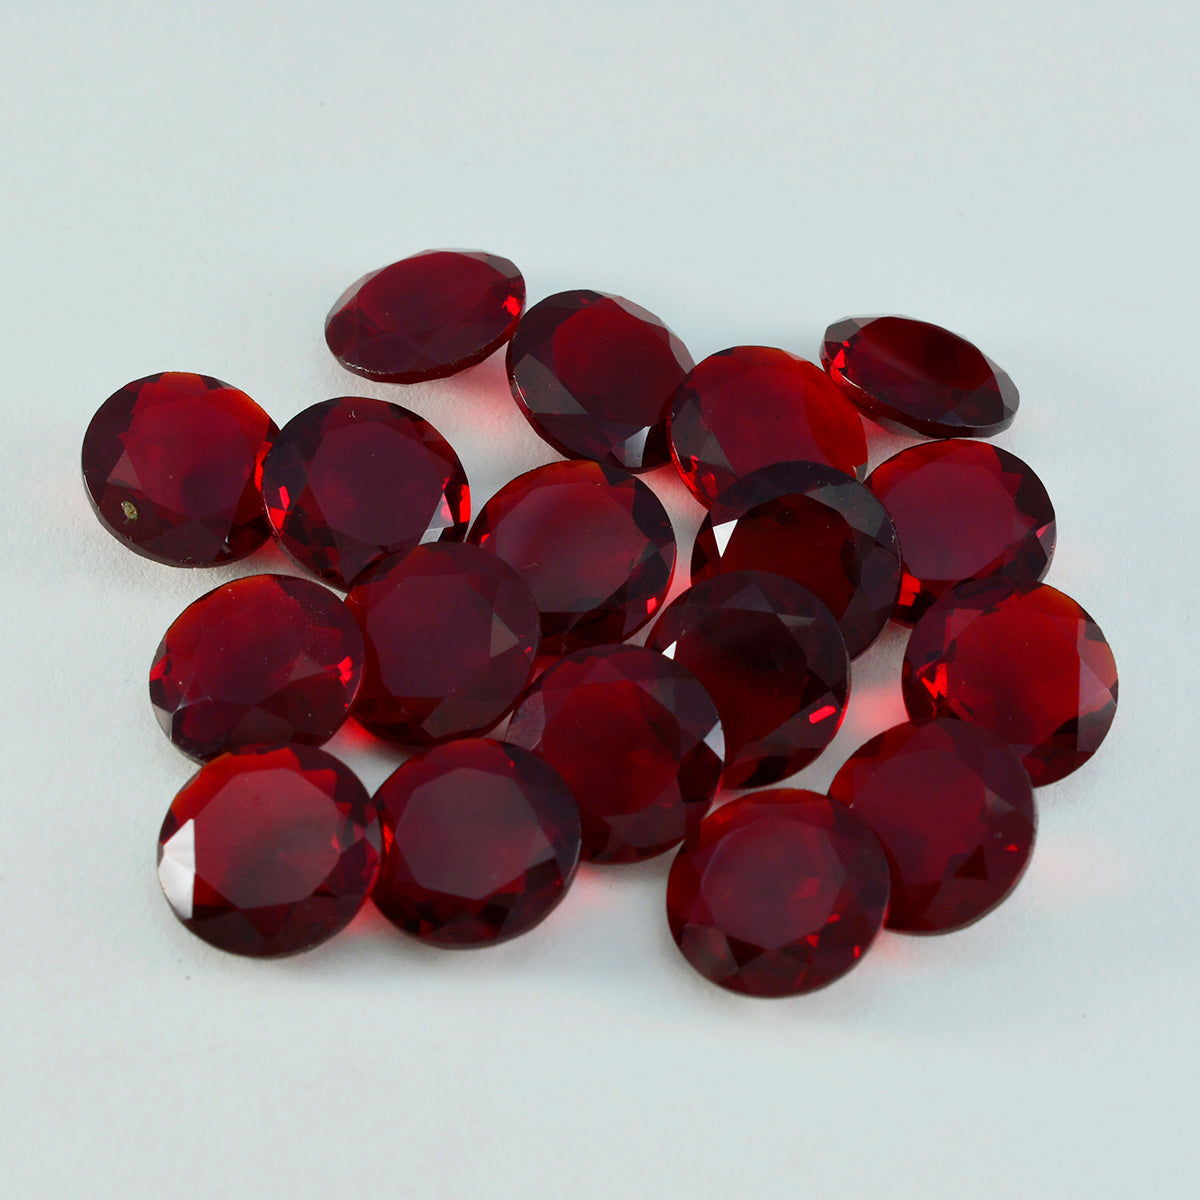 Riyogems 1PC Red Ruby CZ Faceted 9x9 mm Round Shape attractive Quality Loose Gemstone